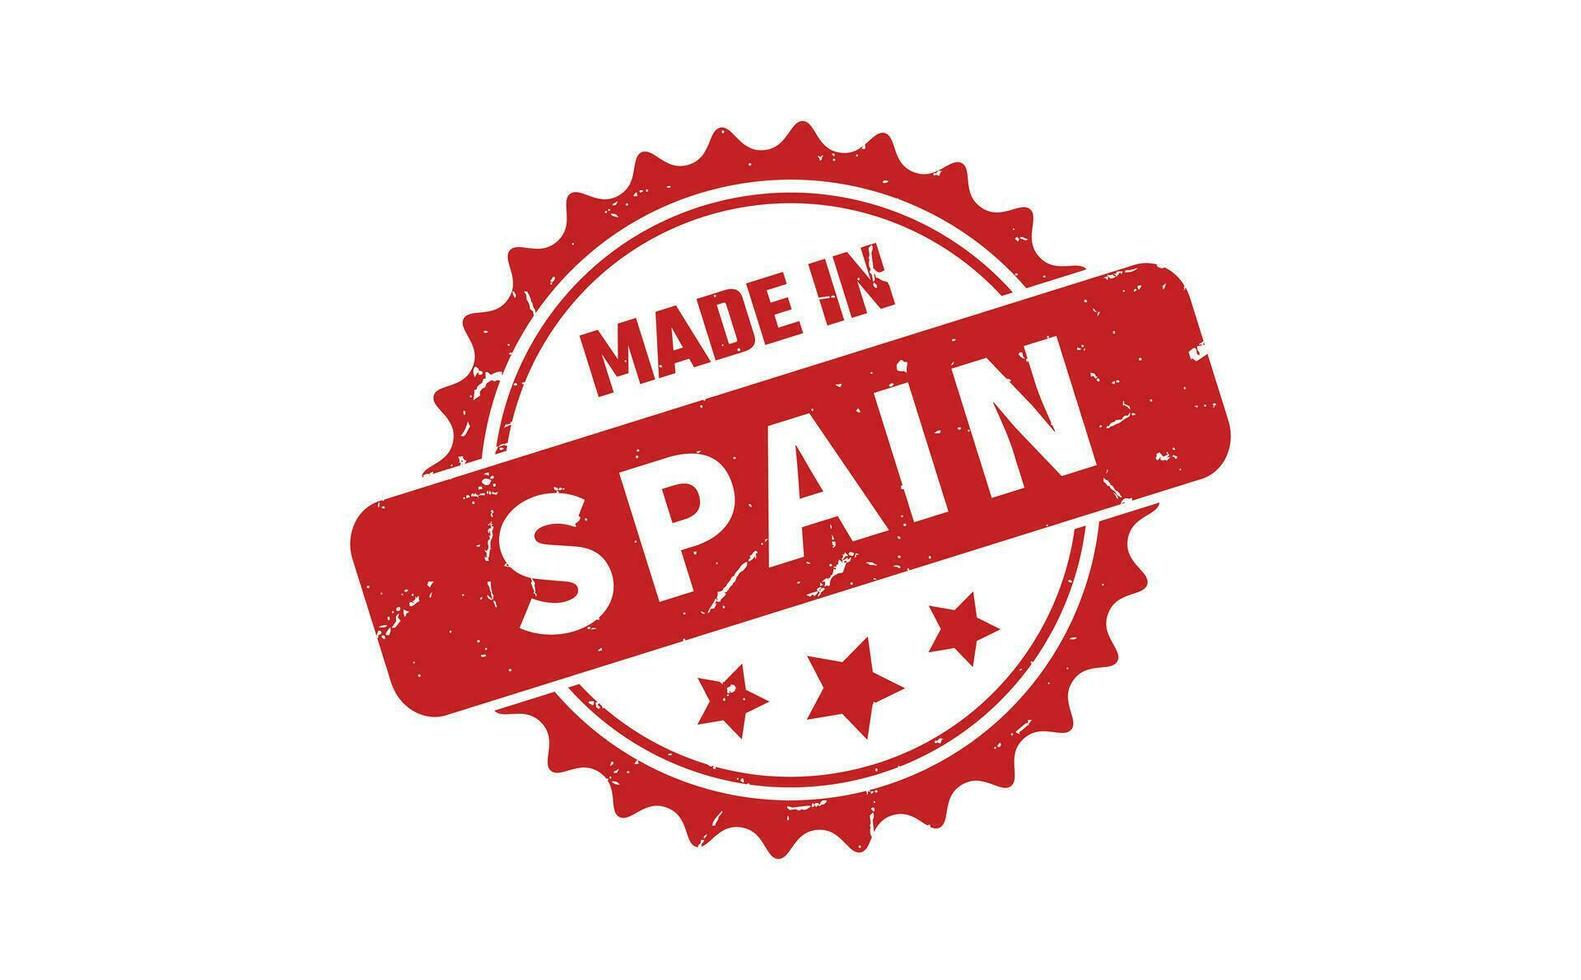 Made In Spain Rubber Stamp vector